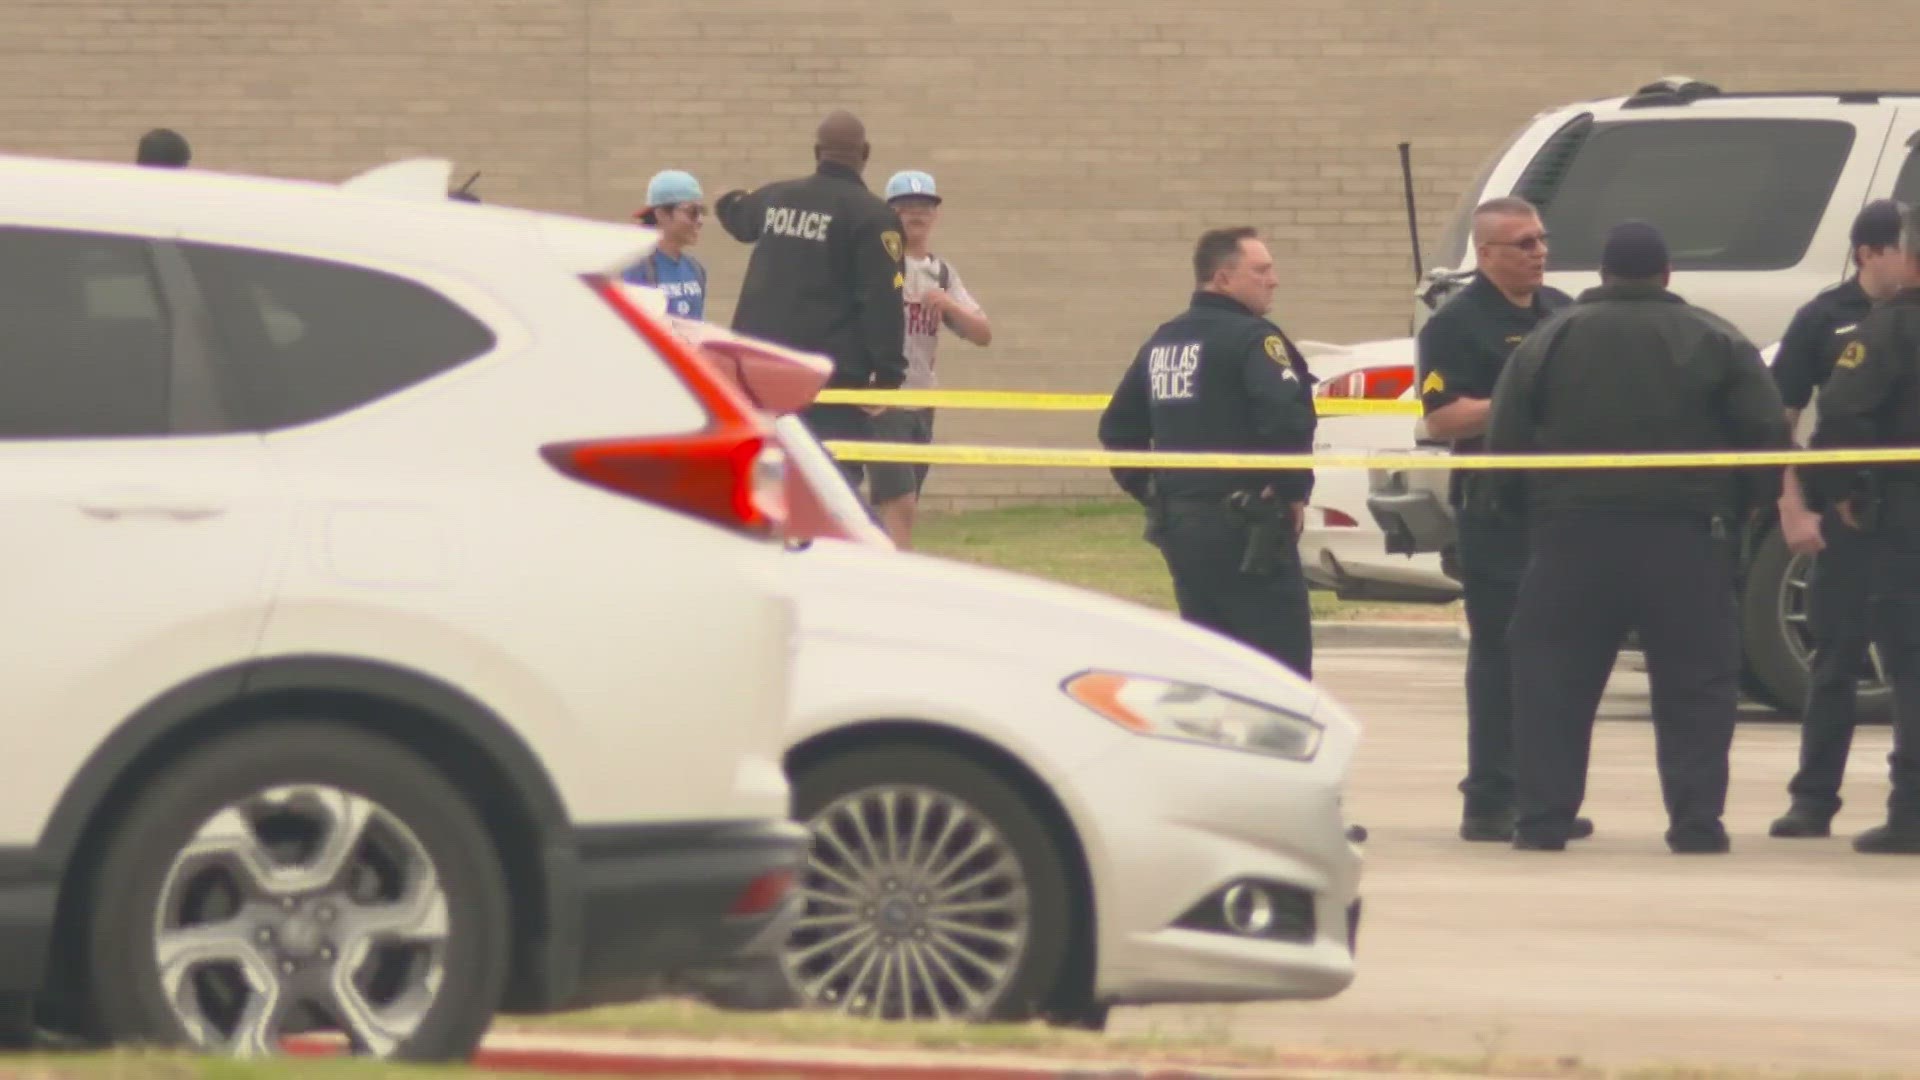 One student was shot and killed outside Lamar High School in Arlington on Monday. Another was injured outside Thomas Jefferson High on Tuesday.